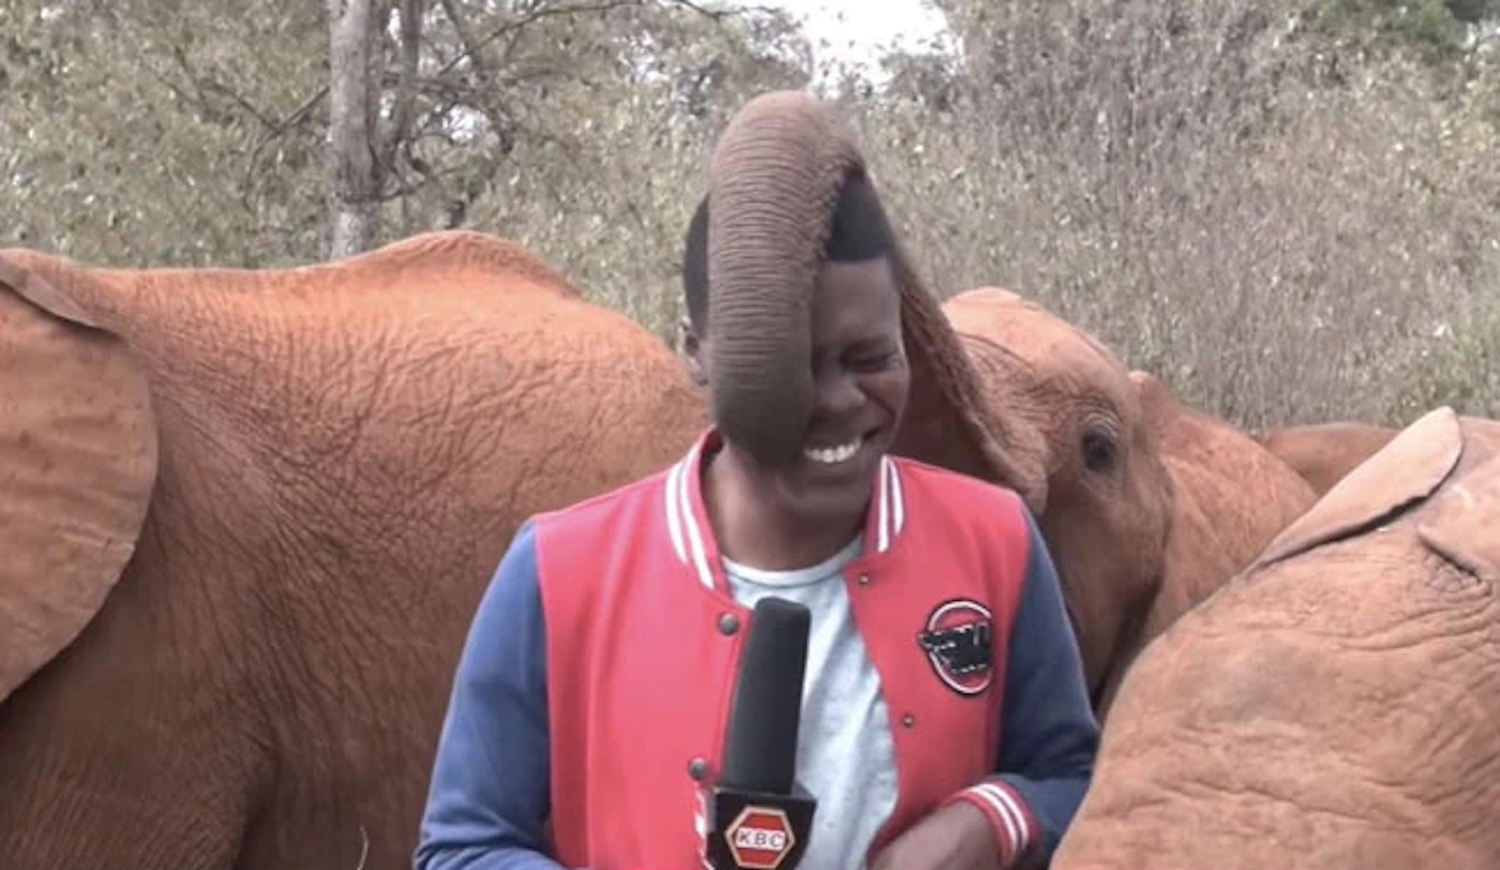 A baby elephant interrupting a News reporter is the cutest thing you will see today!